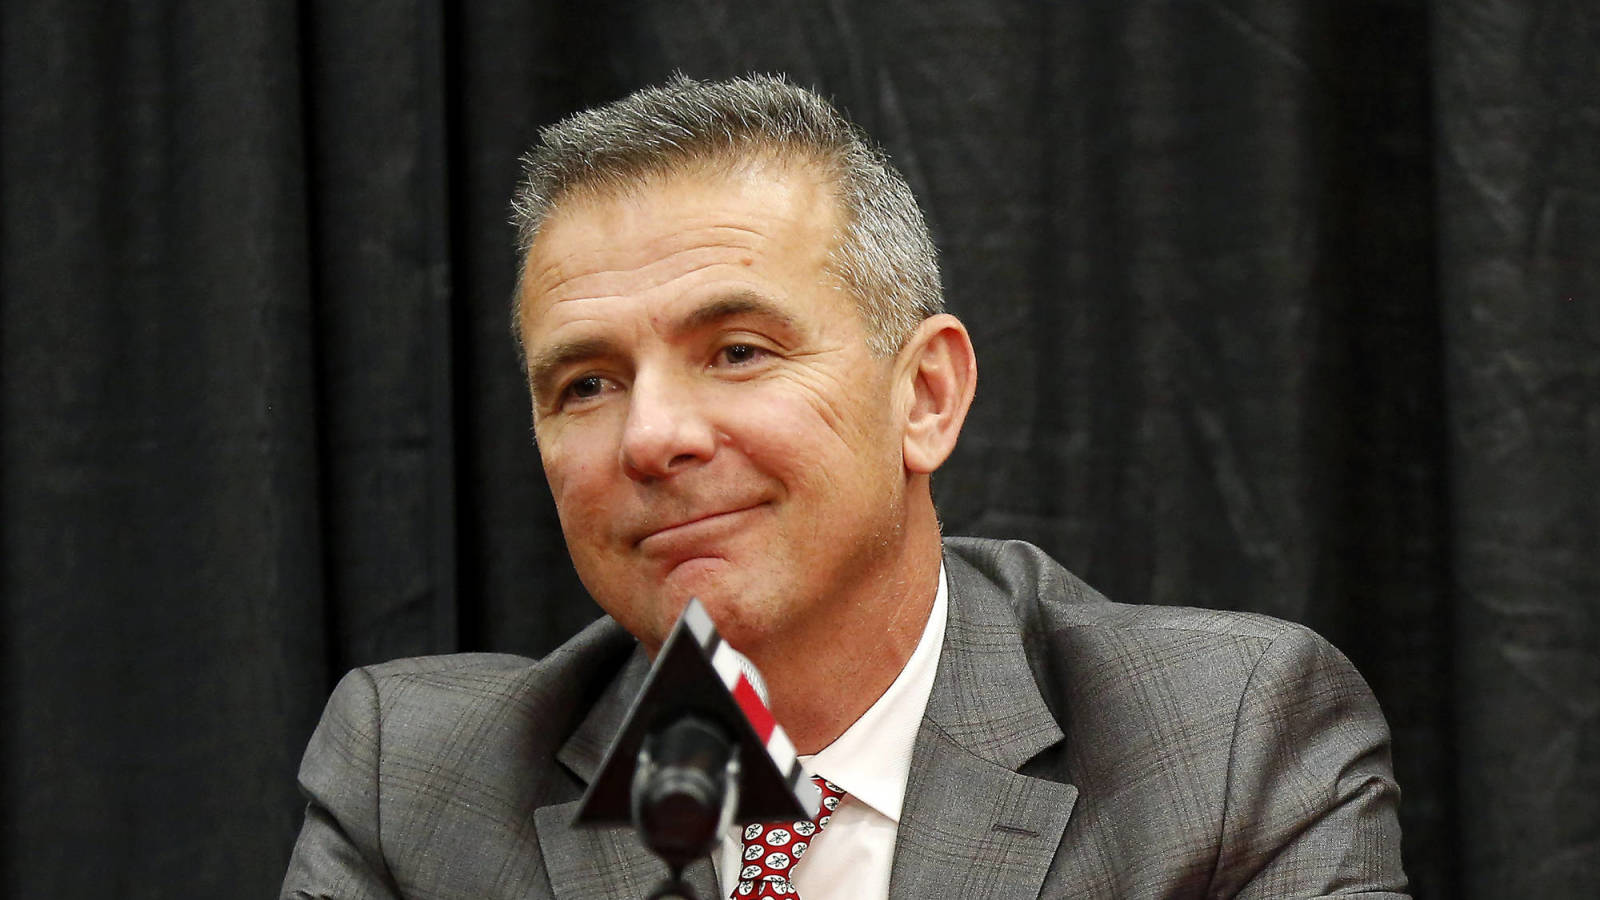 Urban Meyer has funny reaction to question about taking Michigan job